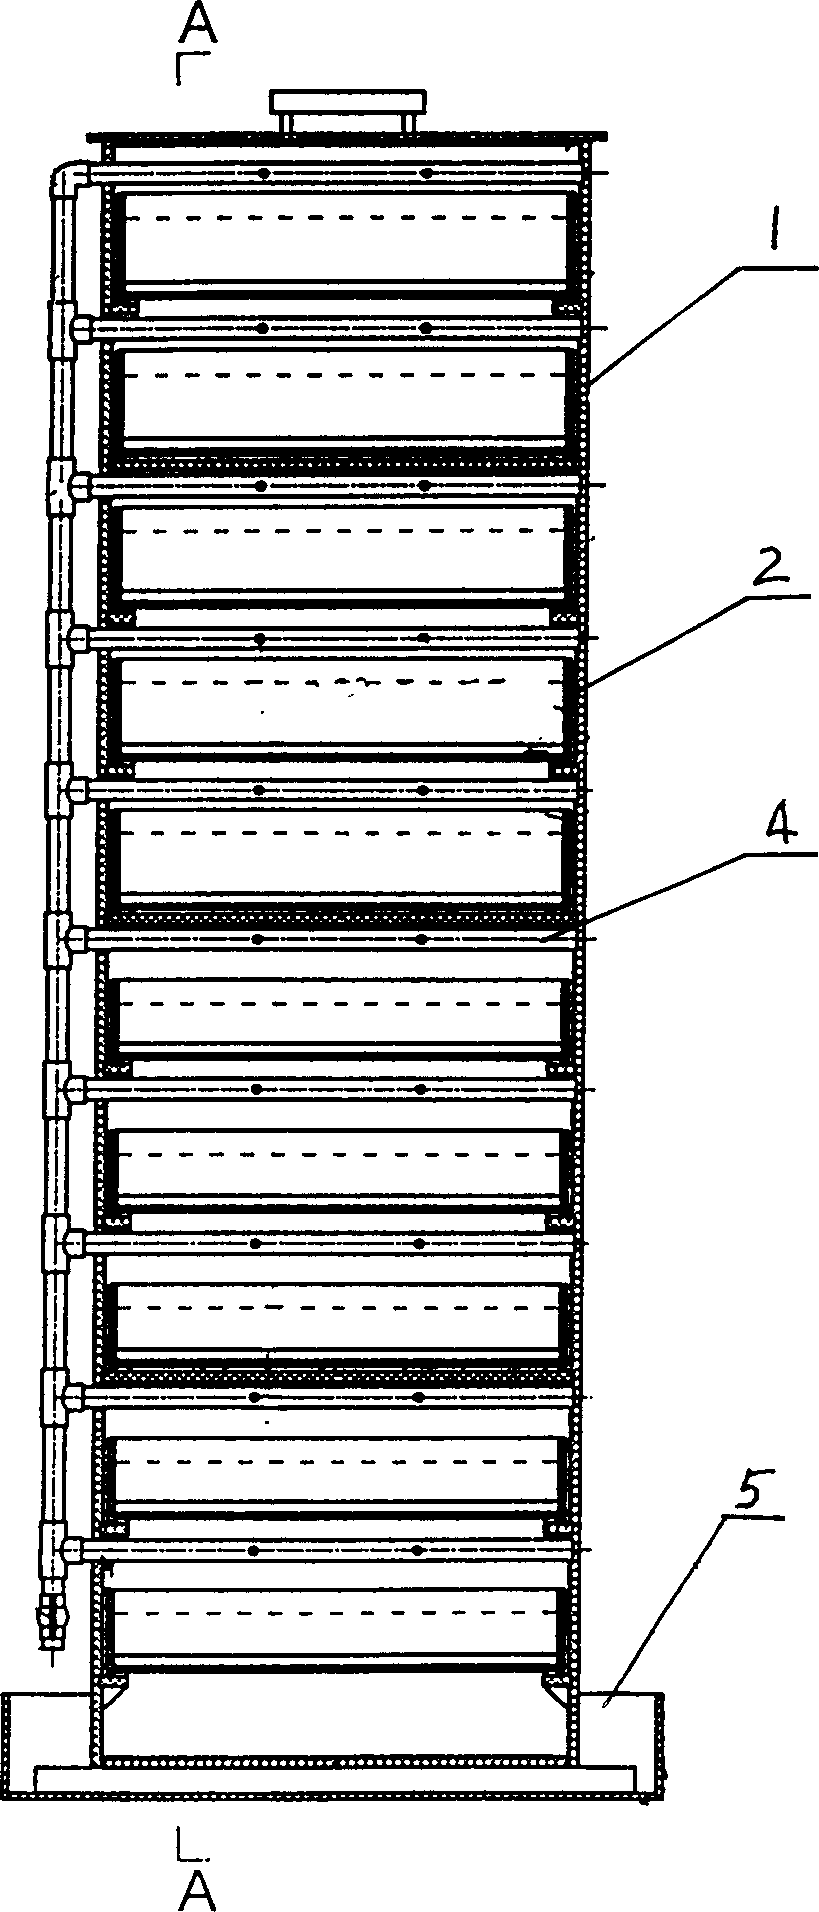 Multi-layer drawer-style culturing device for bottom fauna